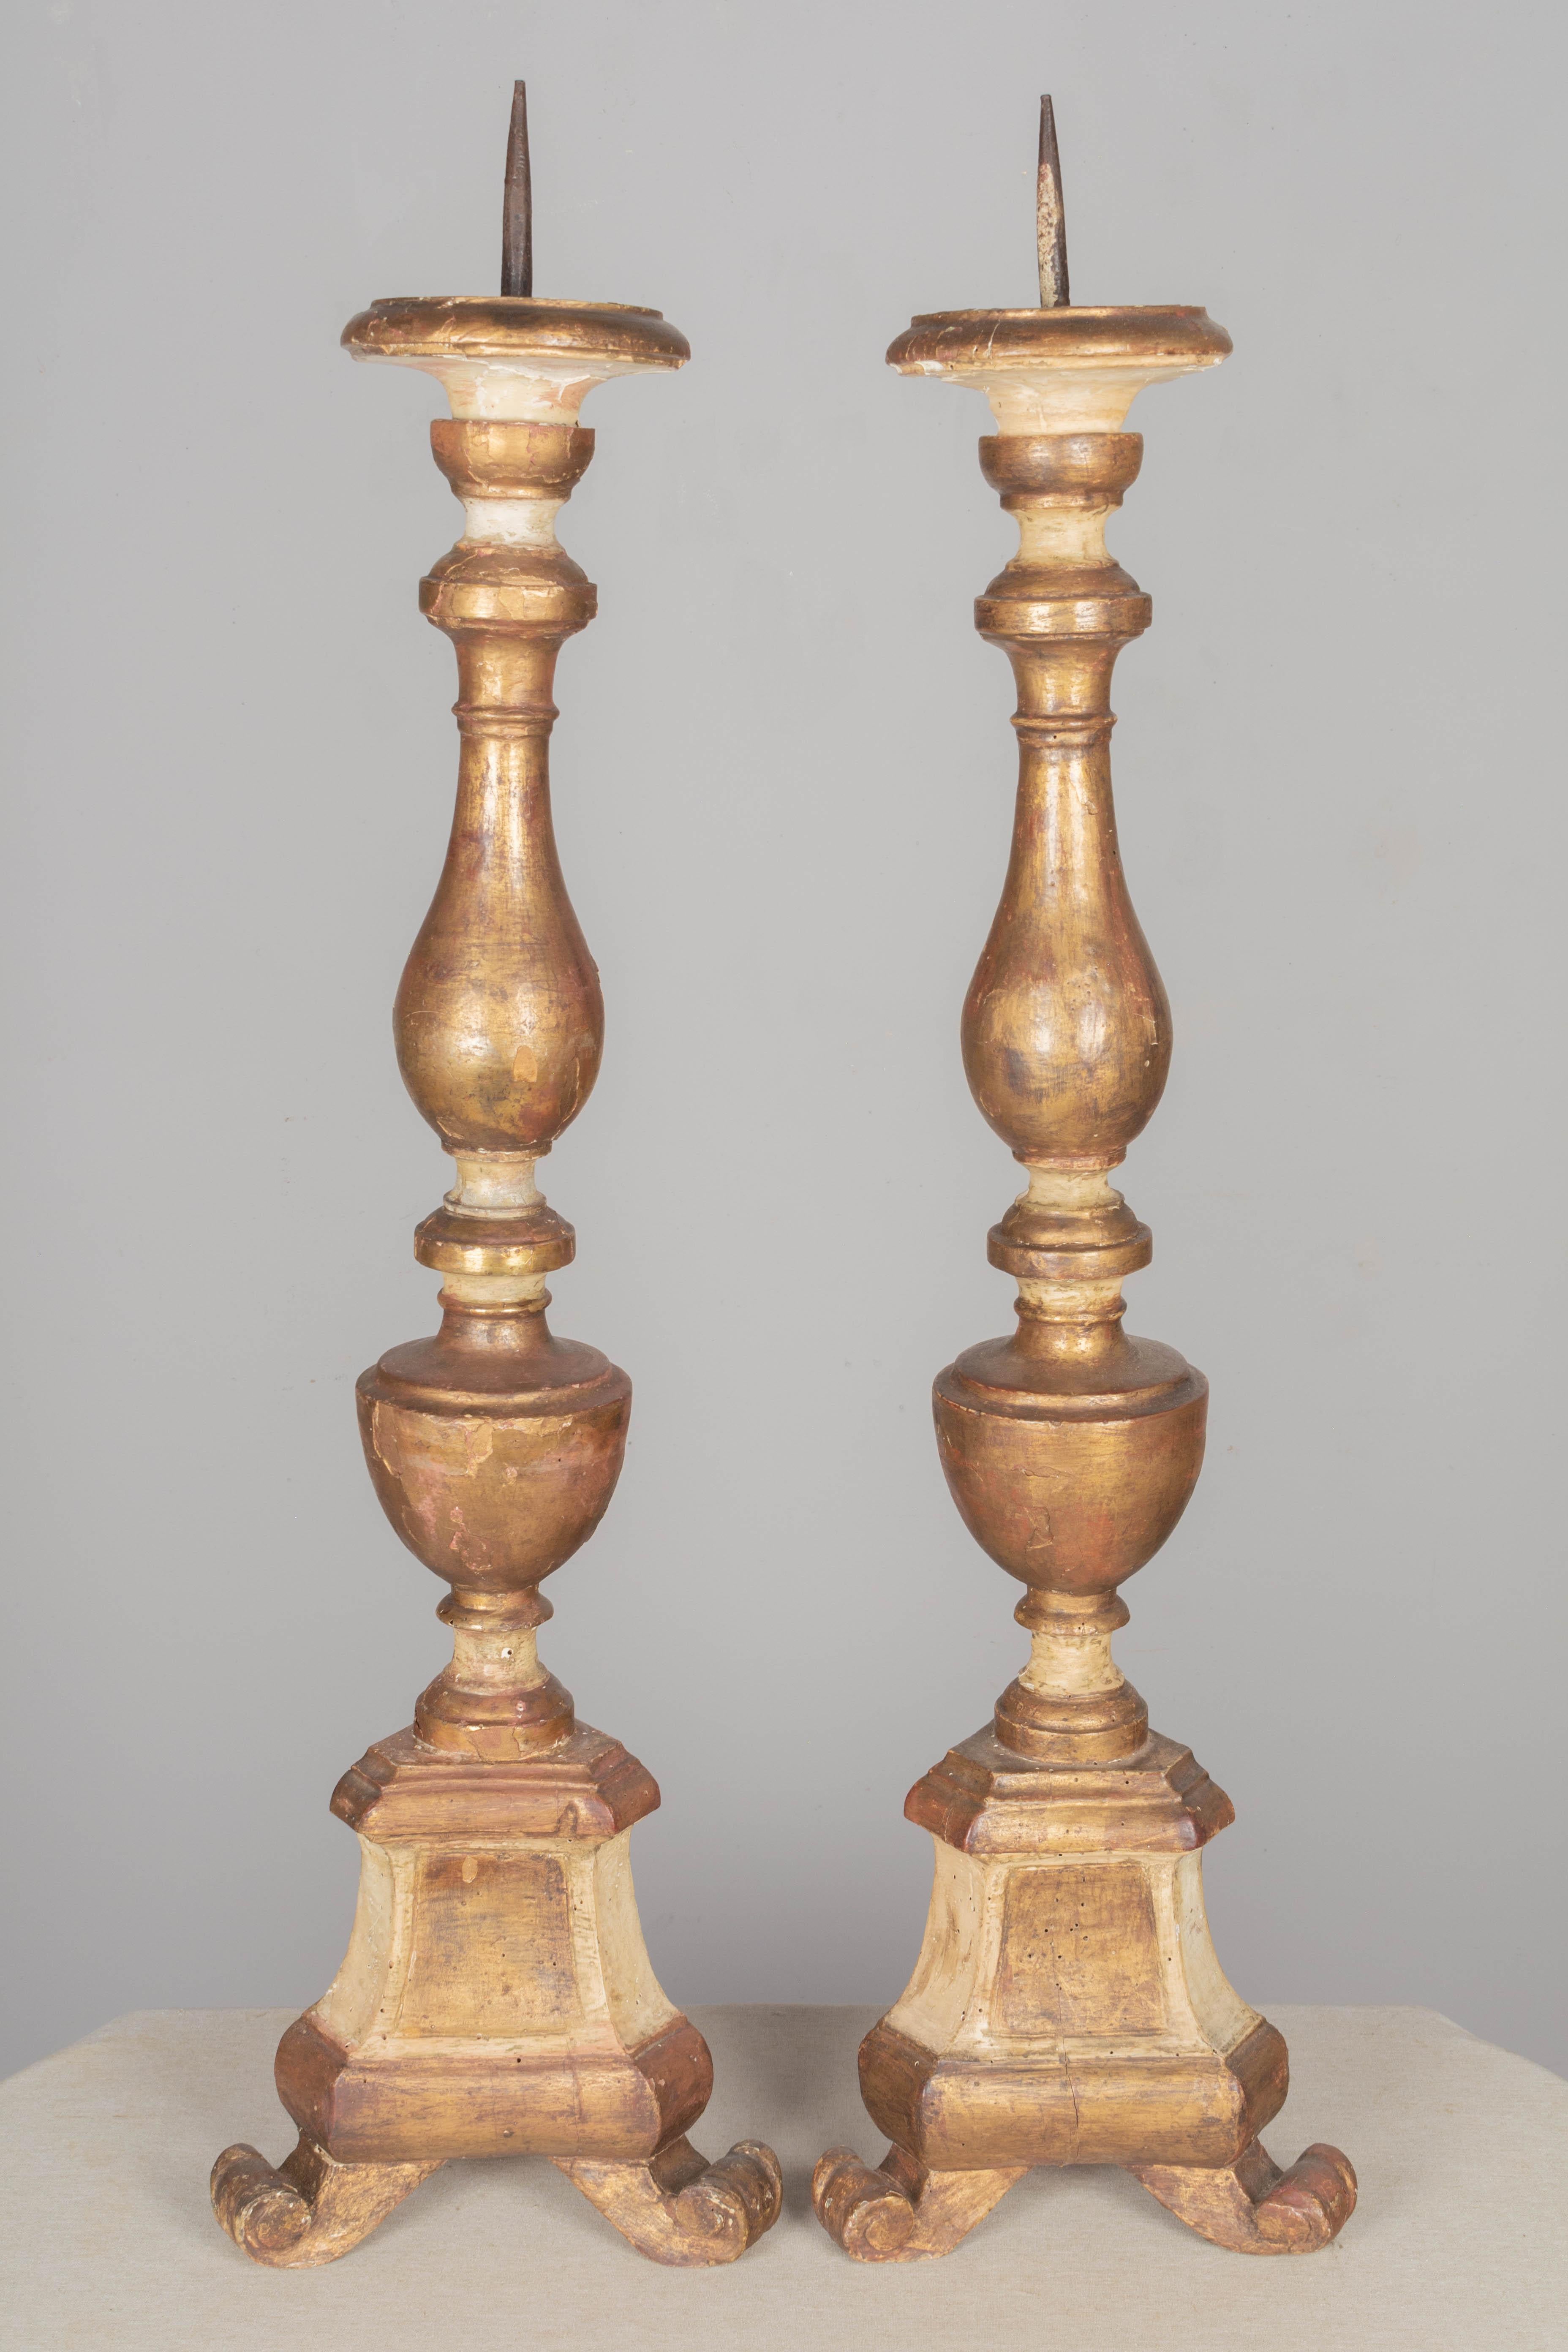 A pair of 19th century Italian giltwood altar candlesticks. Tall columns on a trefoil base. Zinc prickets. Distressed gilt finish. Heavy gilt losses and touch-ups. 
Measures: 11